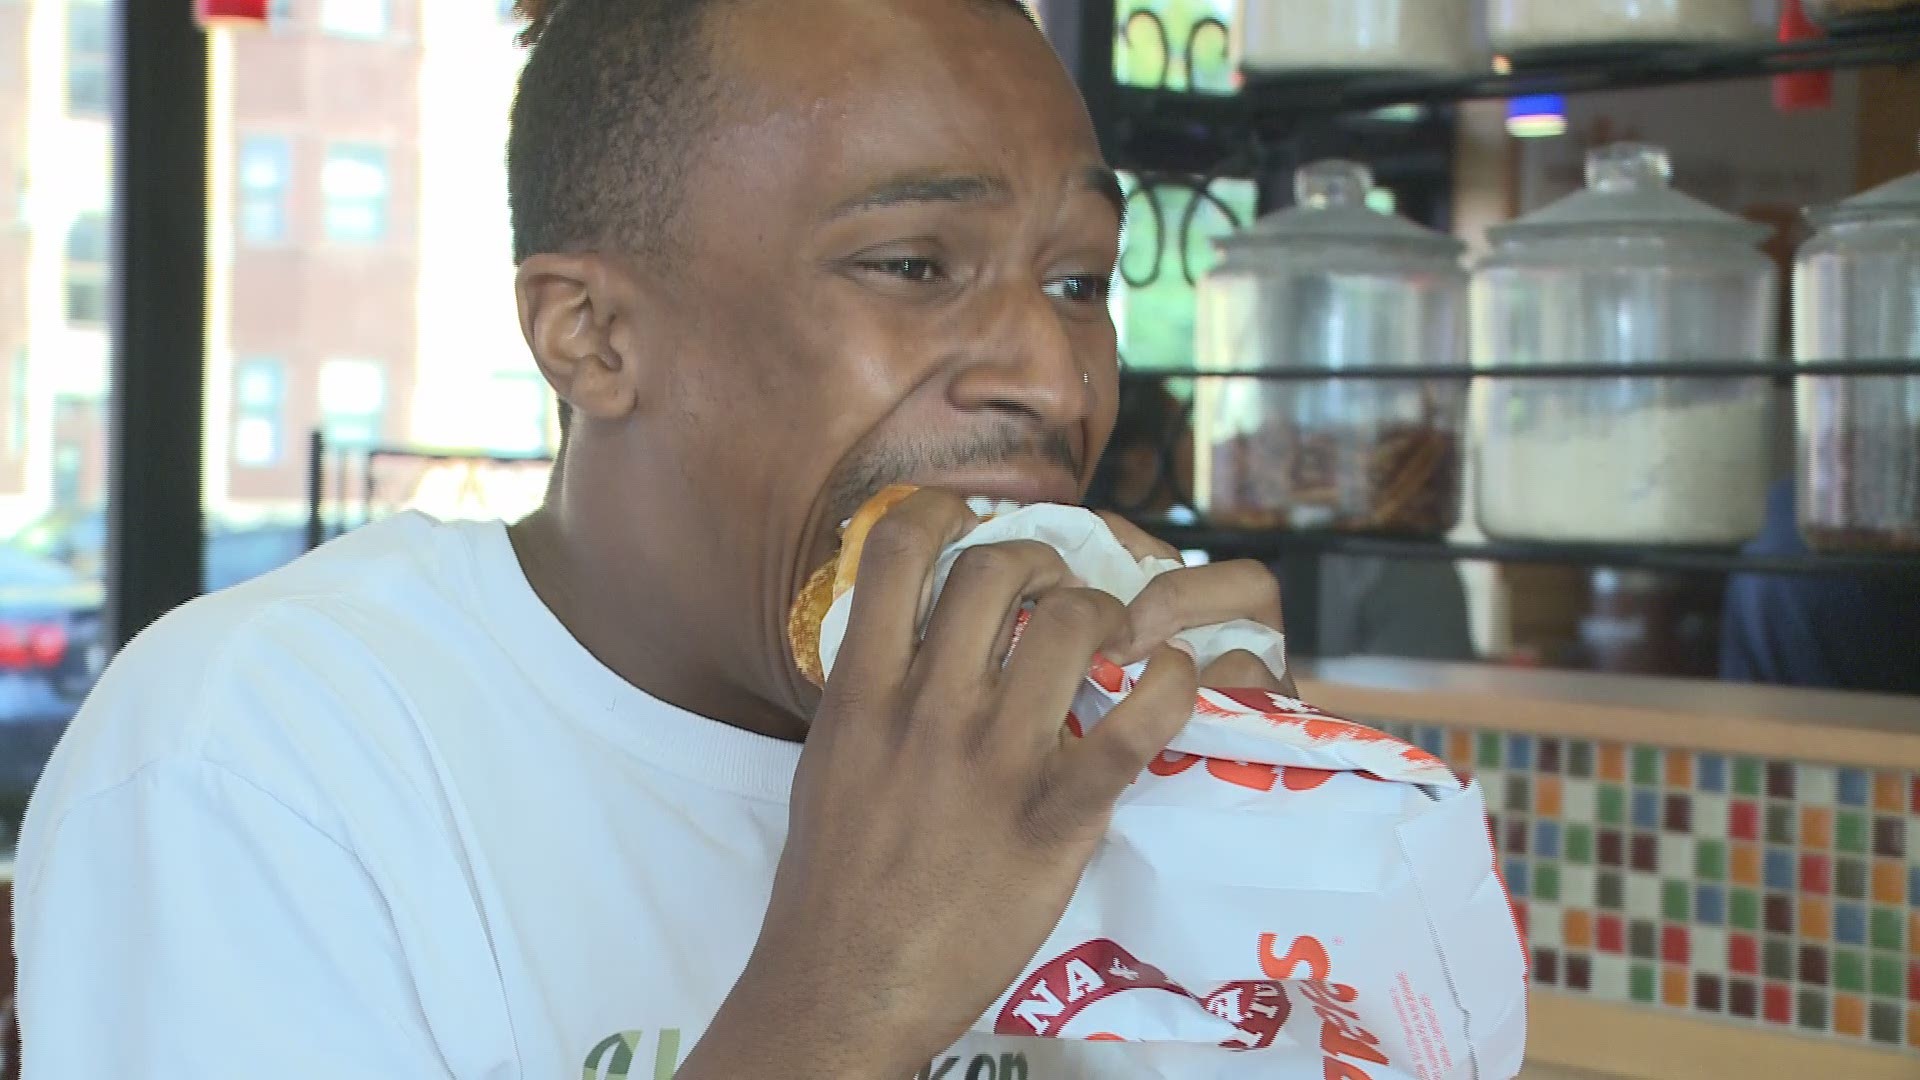 Channel 3's Ray Strickland visited the Popeyes restaurant in Cleveland to see how diners like the new chicken sandwich. This man is a fan!